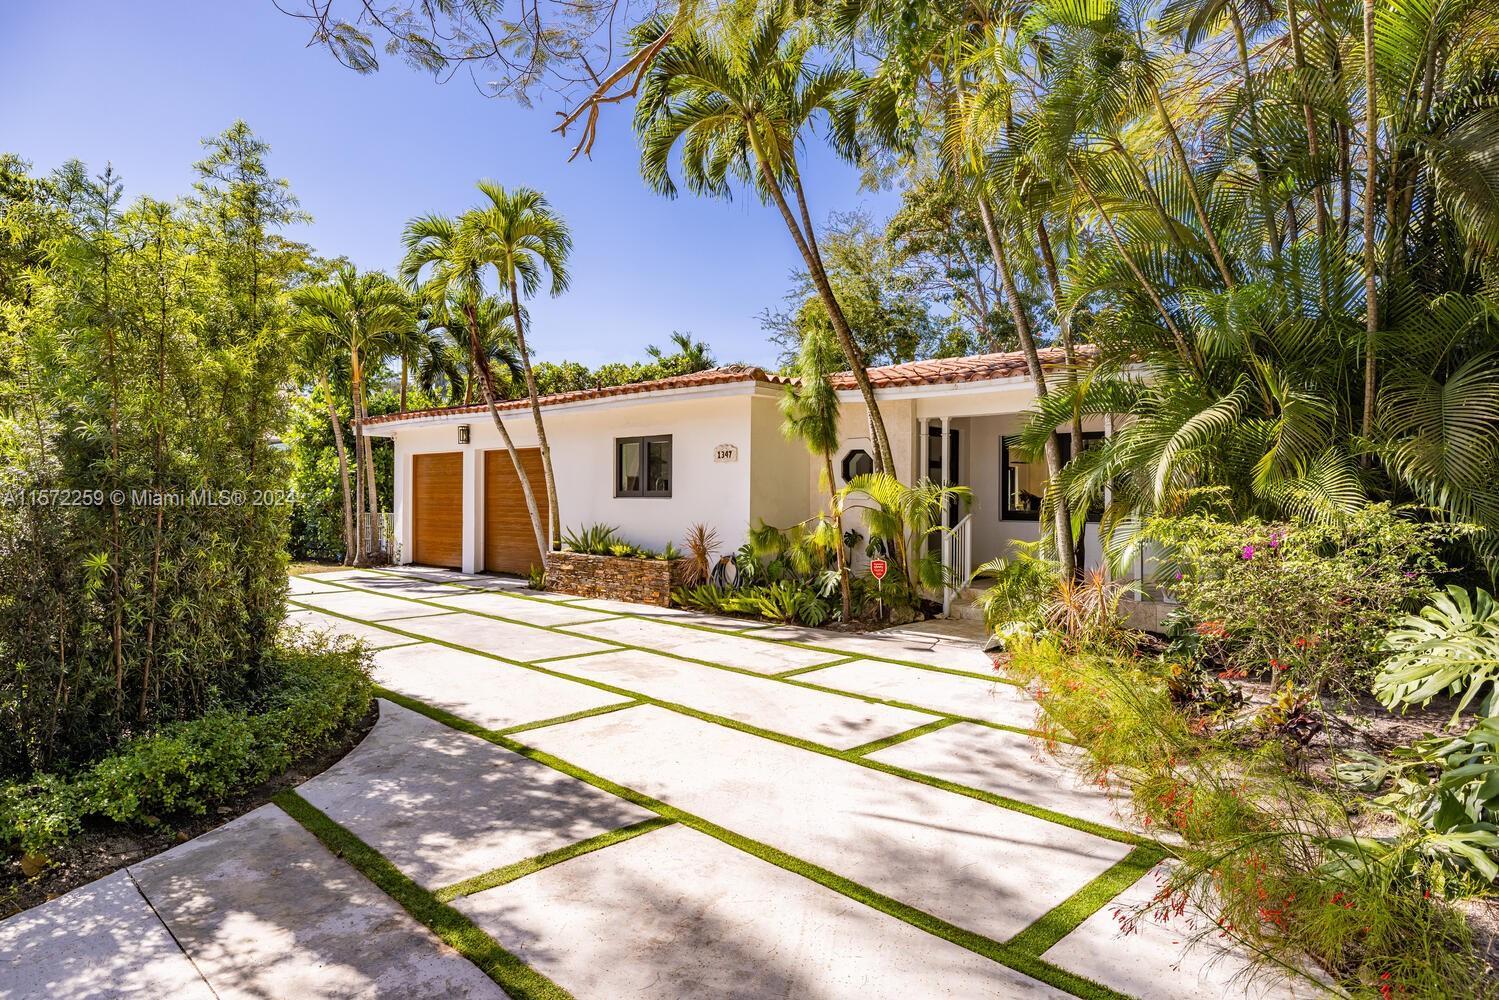 Photo of 1347 Bird Rd in Coral Gables, FL